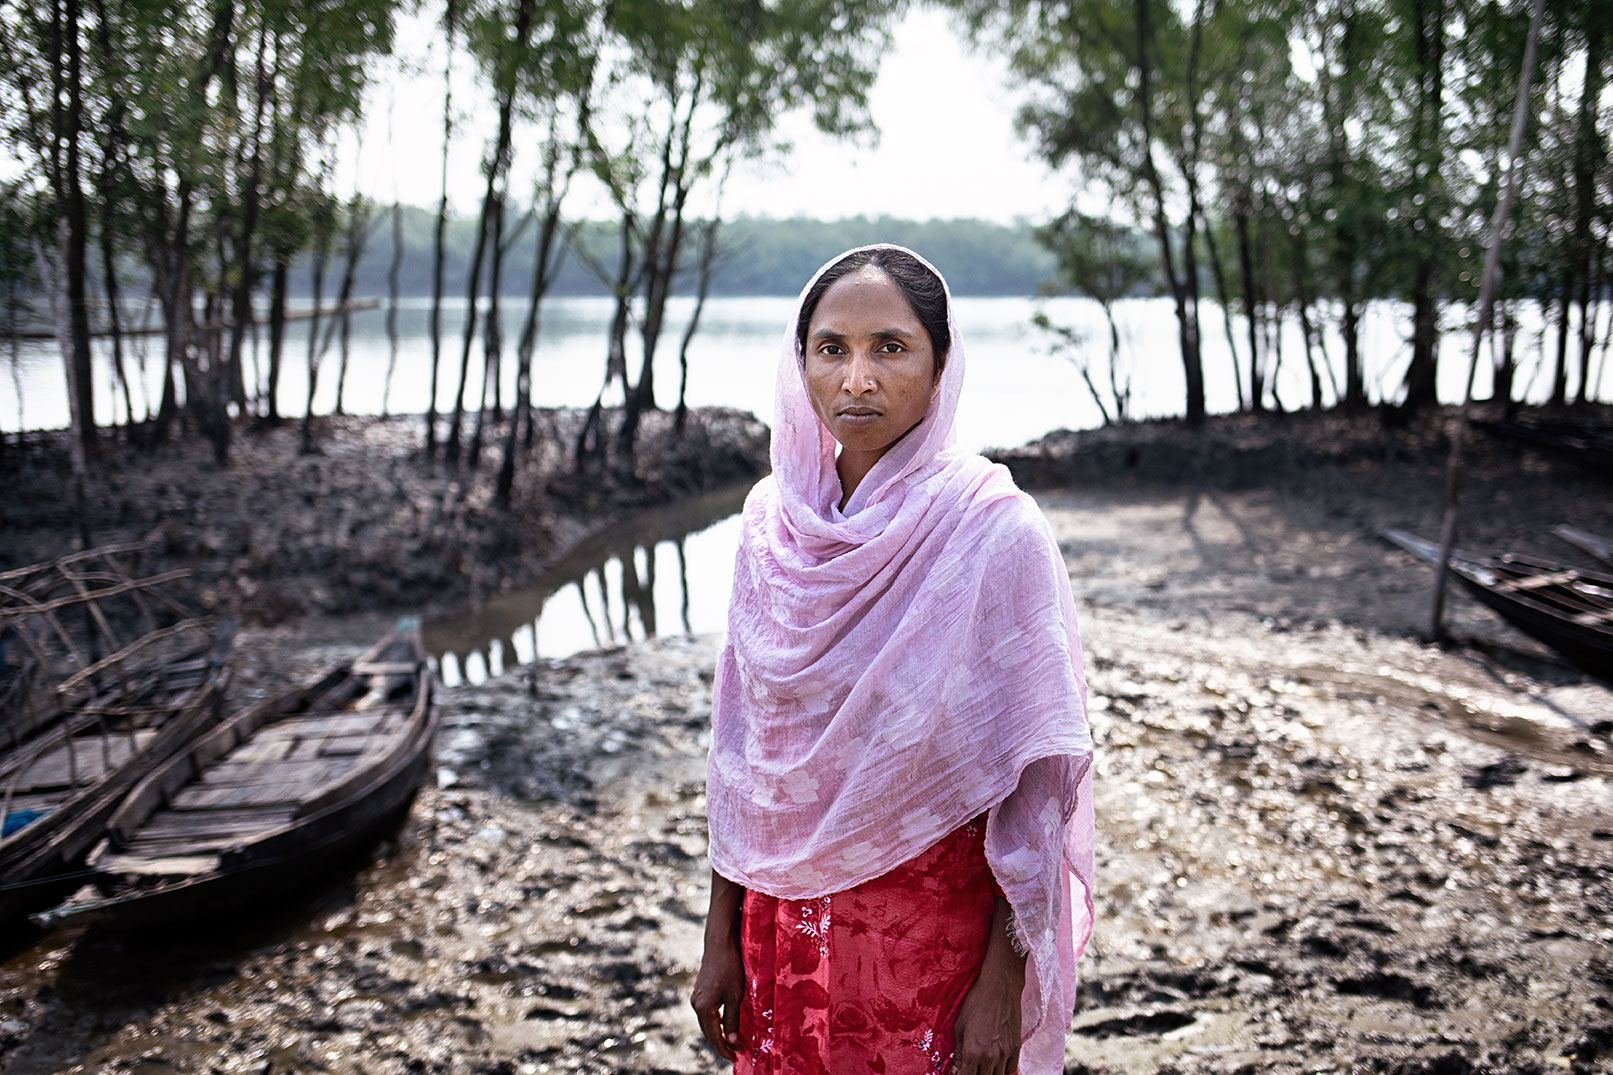 Selena Parvin stands on muddy ground near a body of water, surrounded by trees and small wooden boats. She is wearing a light pink headscarf and a red outfit. The background is a mix of natural elements, indicating a rural or natural setting, likely in a coastal area.